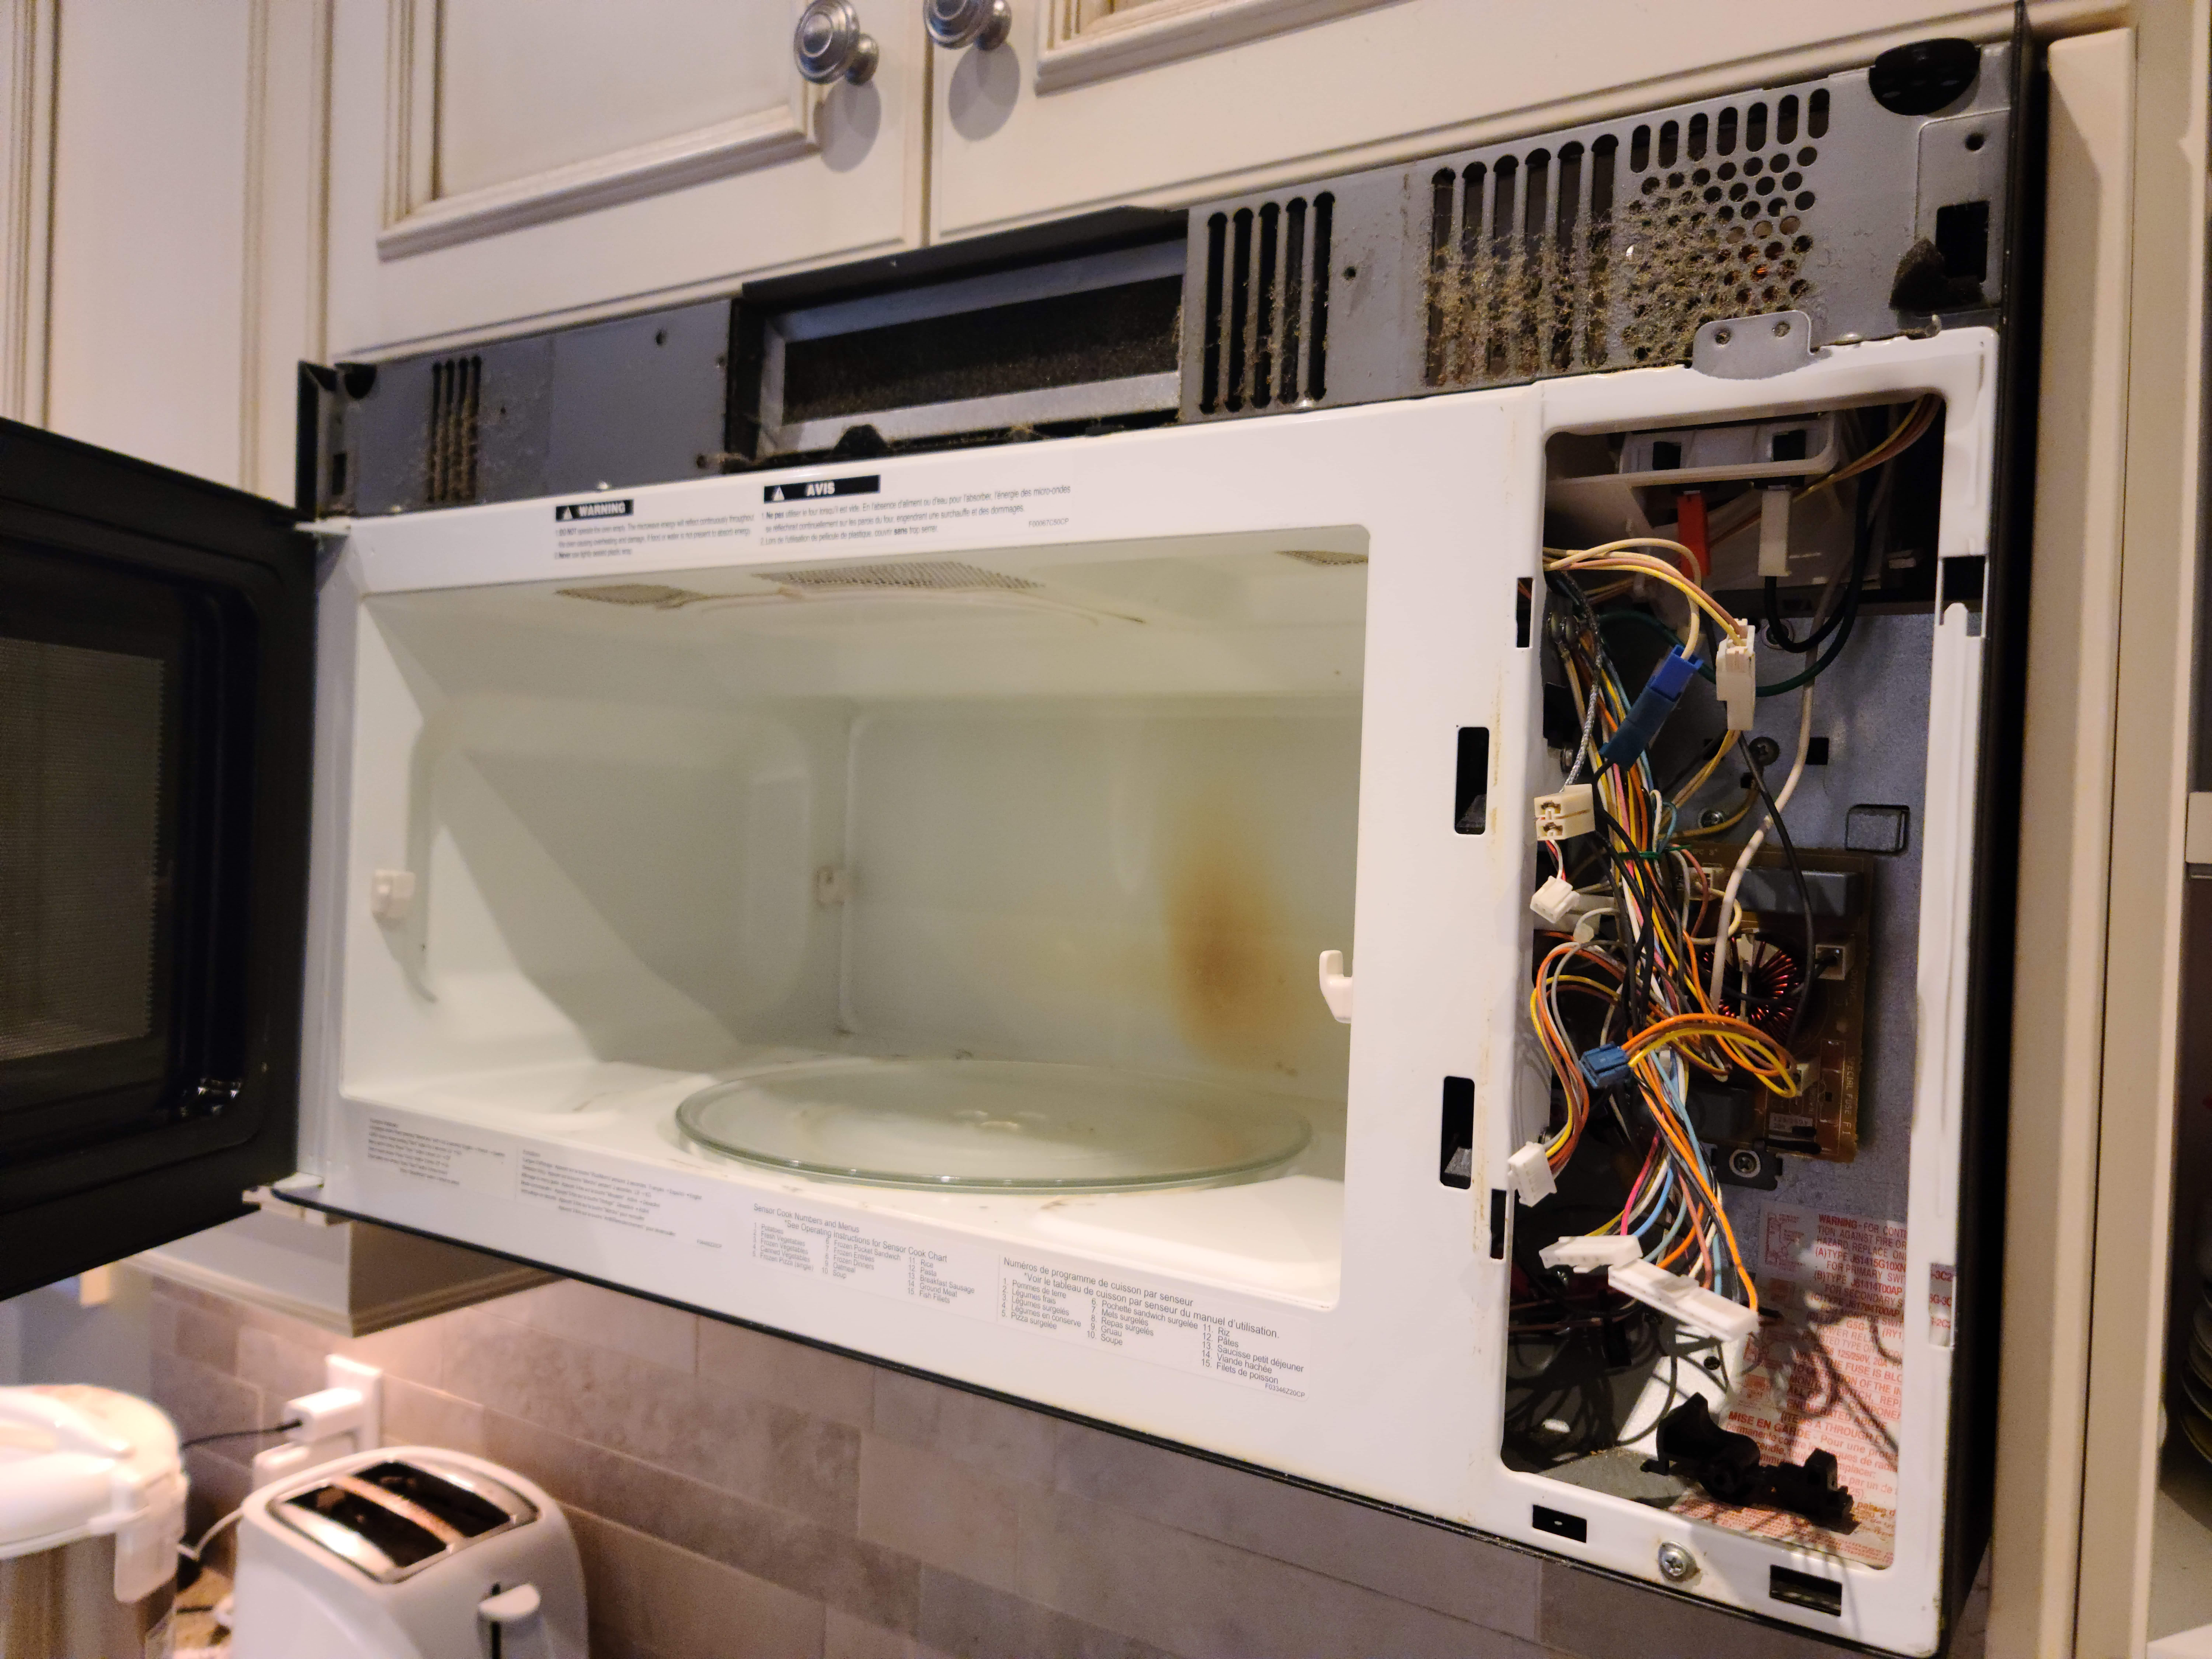 PROLONG THE APPLIANCES LIFE WITH THESE CAREFUL TIPS